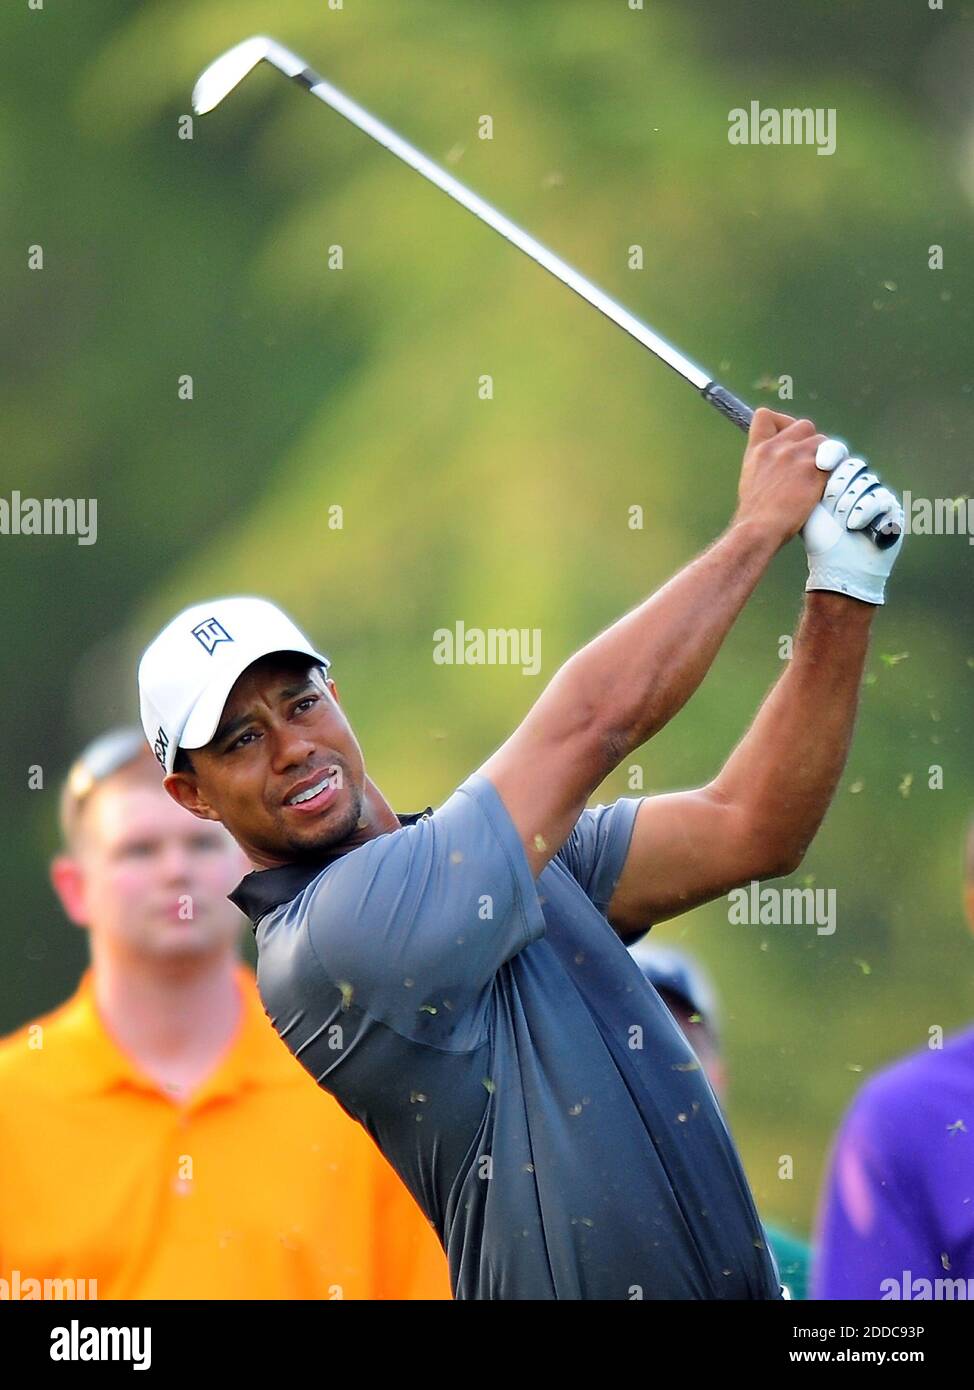 NO FILM, NO VIDEO, NO TV, NO DOCUMENTARY - Tiger Woods tees off from the second tee box during the Wells Fargo Championship Pro-Am at Quail Hollow Club in Charlotte, North Carolina, USA on Wednesday, May 2, 2012. Photo byJeff Siner/Charlotte Observer/MCT/ABACAPRESS.COM Stock Photo